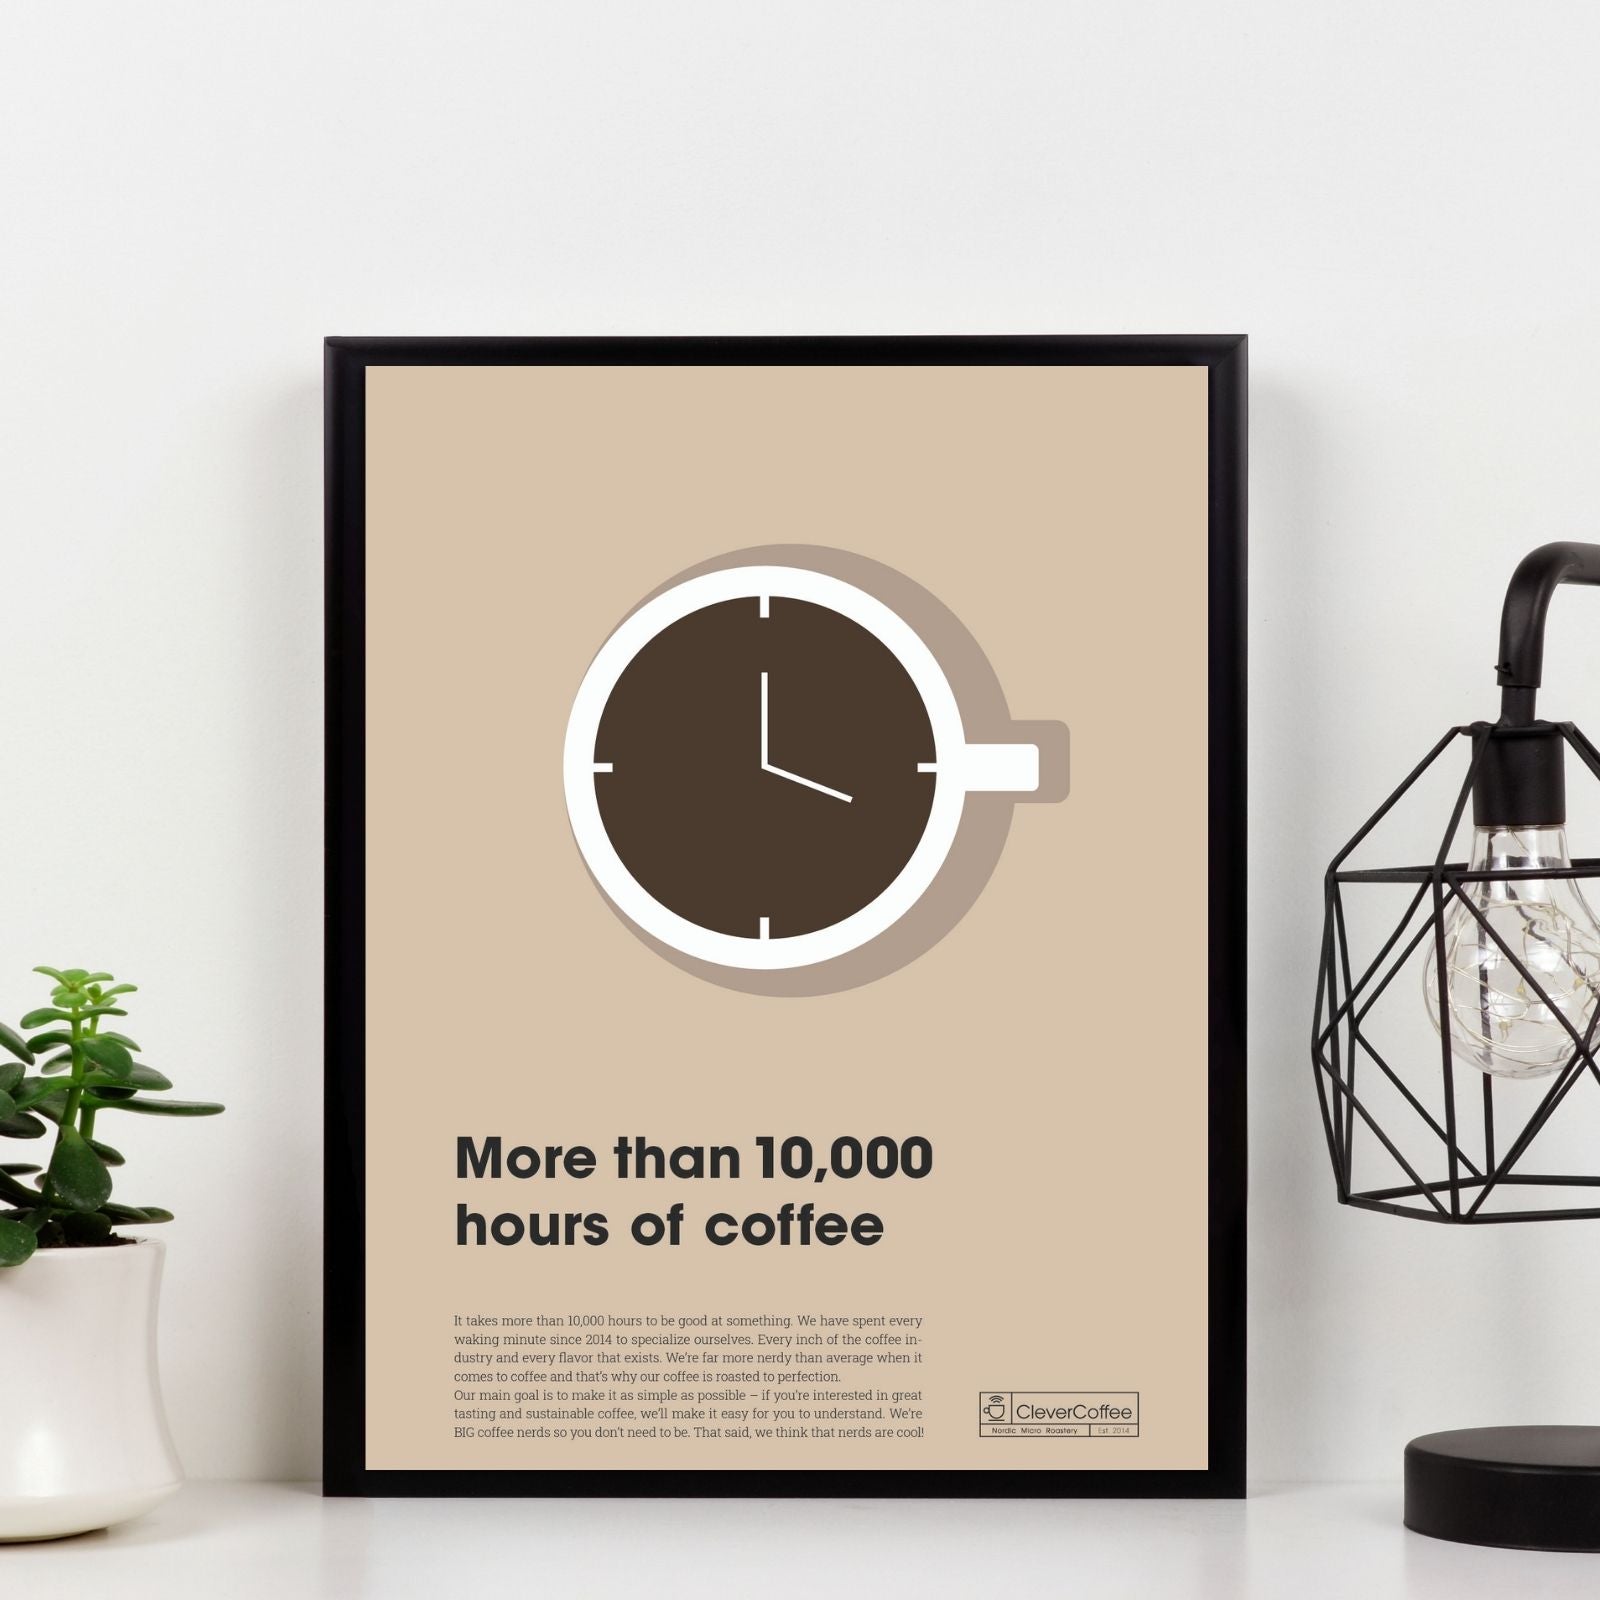 Plakat "More than 10.000 hours of coffee"